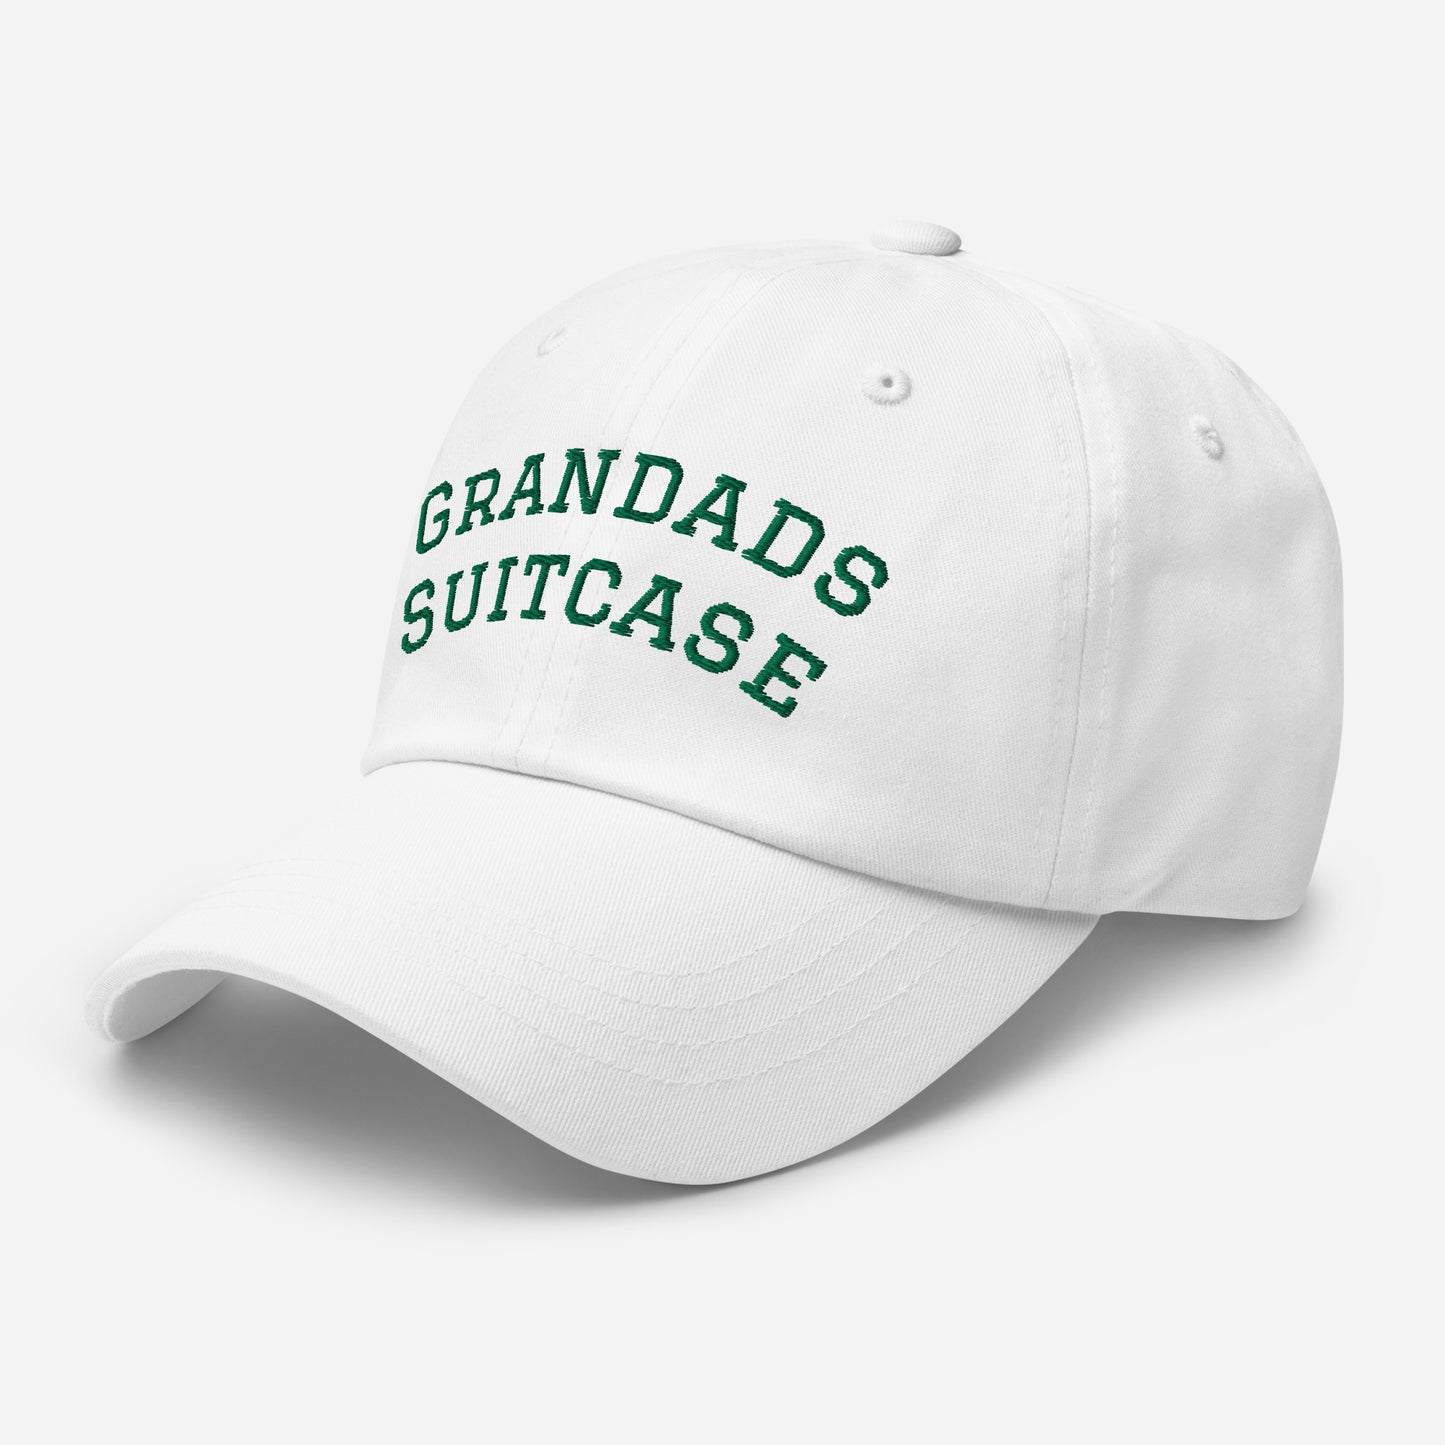 Grandads Suitcase Hat in White